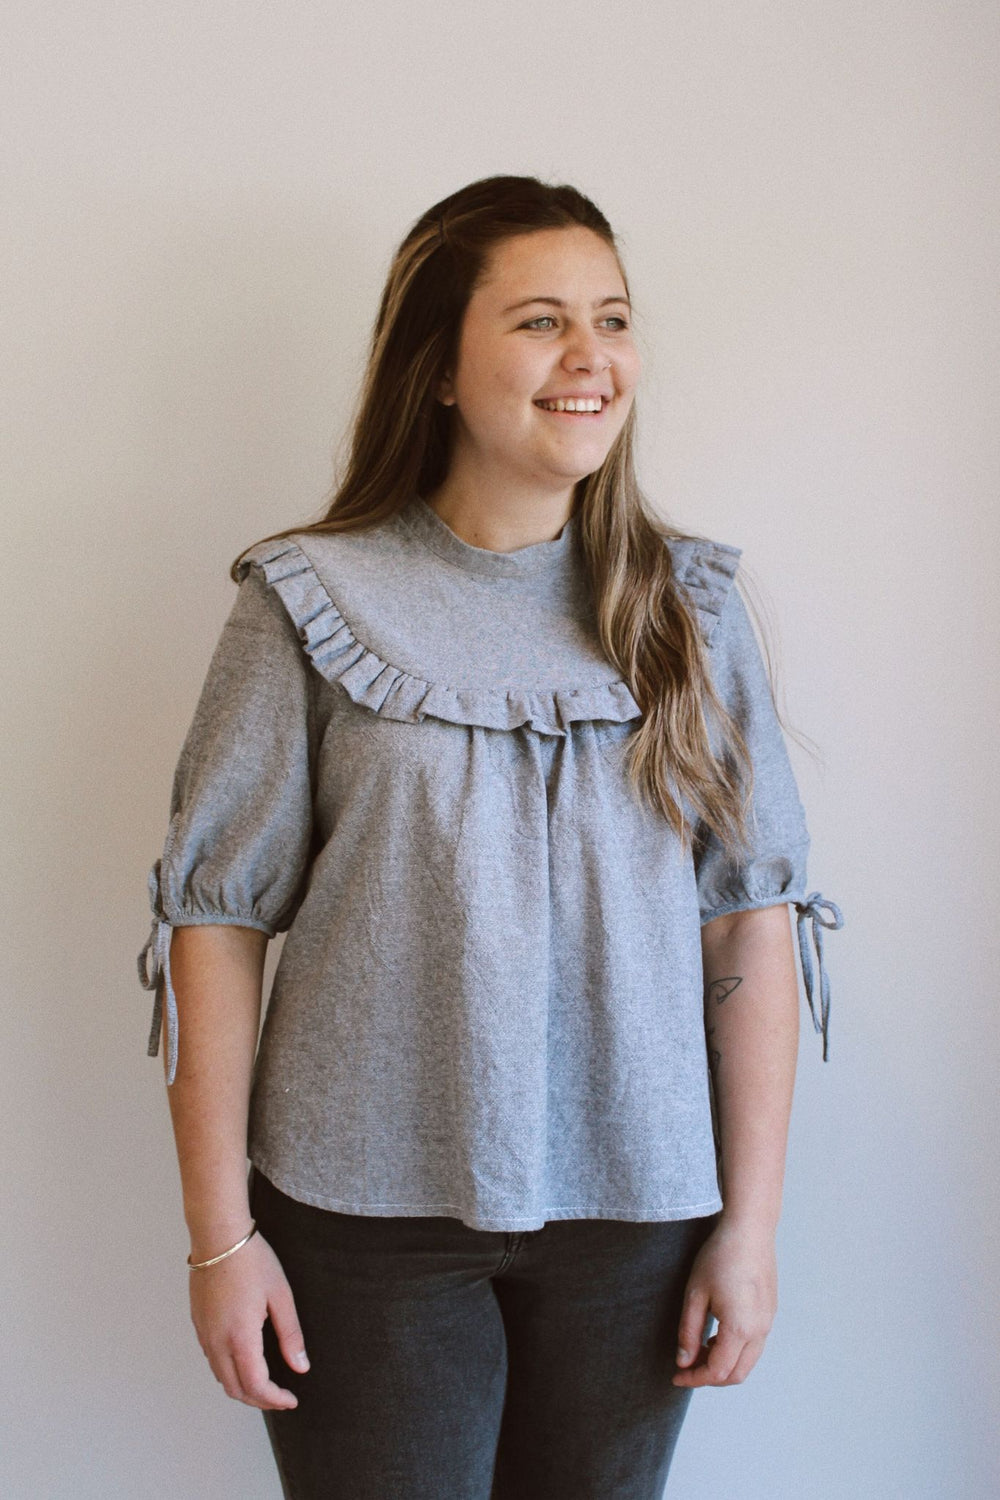 Woman wearing the Dua Blouse sewing pattern from Makyla Creates on The Fold Line. A top pattern made in linen, cotton, double gauze, crepe de chine, poplin, silk, rayon or tencel fabrics, featuring a relaxed fit, stand collar, button up shoulder placket c